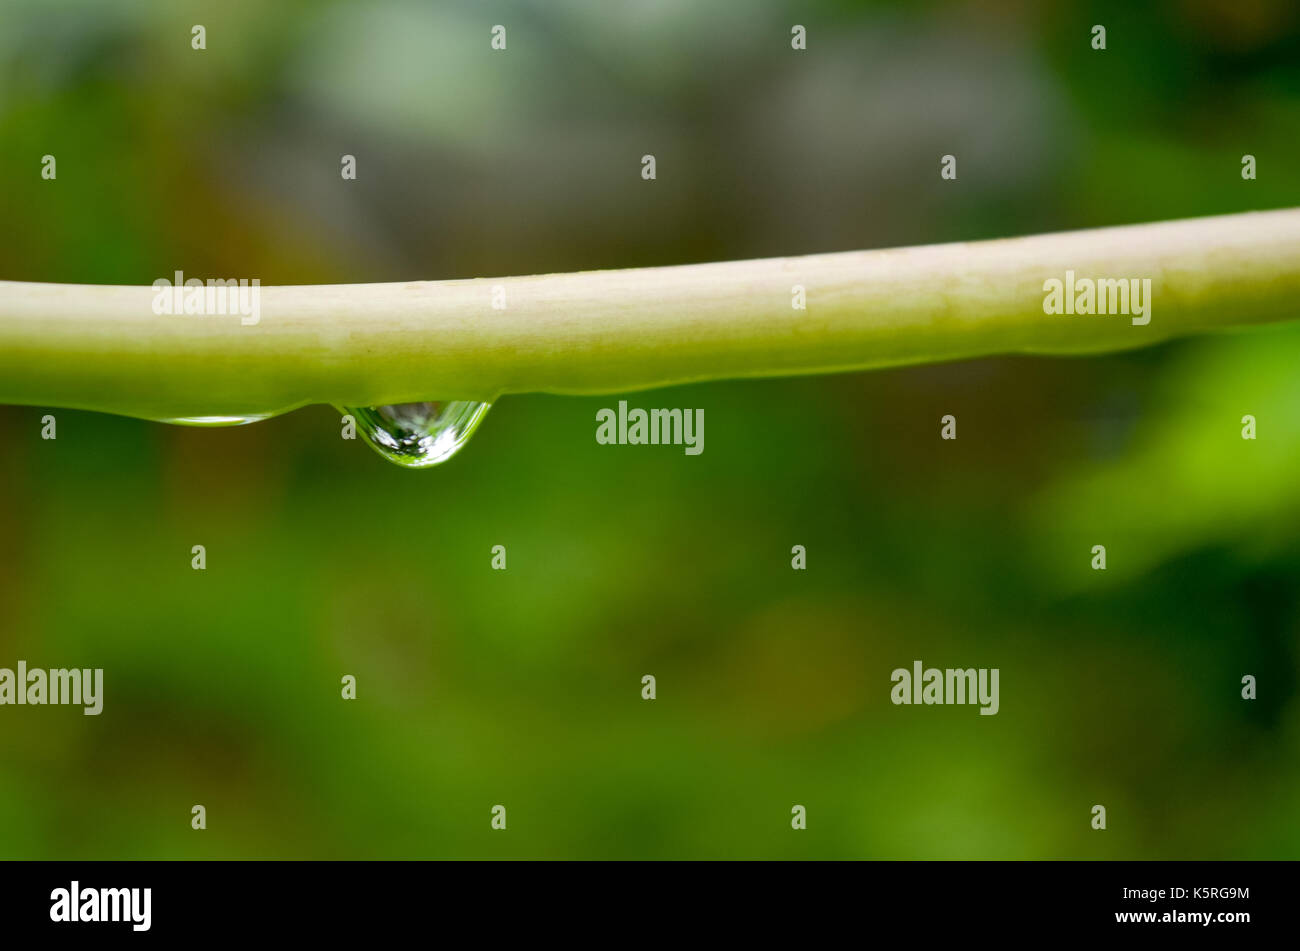 Single, reflective, water drop hanging from a plant stem. Stock Photo